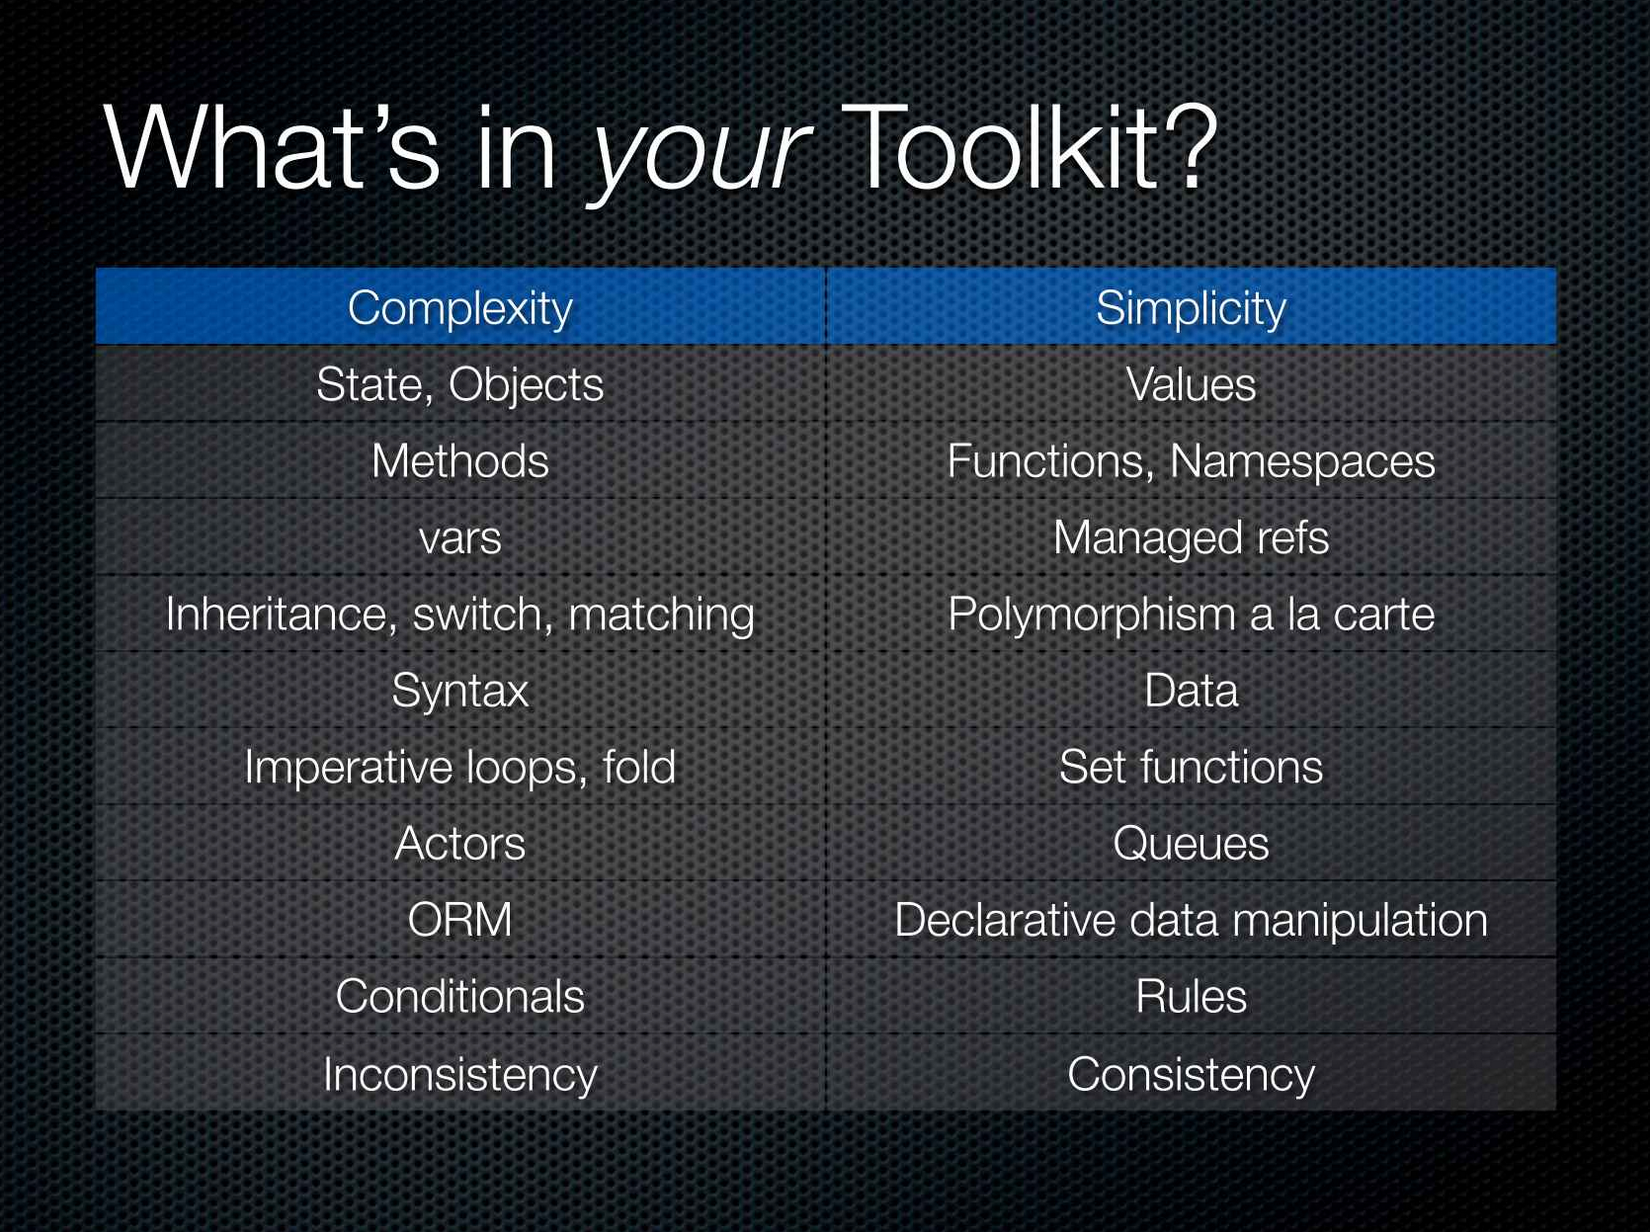 Hickey&rsquo;s &ldquo;Simplicity toolkit&rdquo; shows complex tools in the left column their equivalent simple to the right. For example, Methods are more complex than Functions.